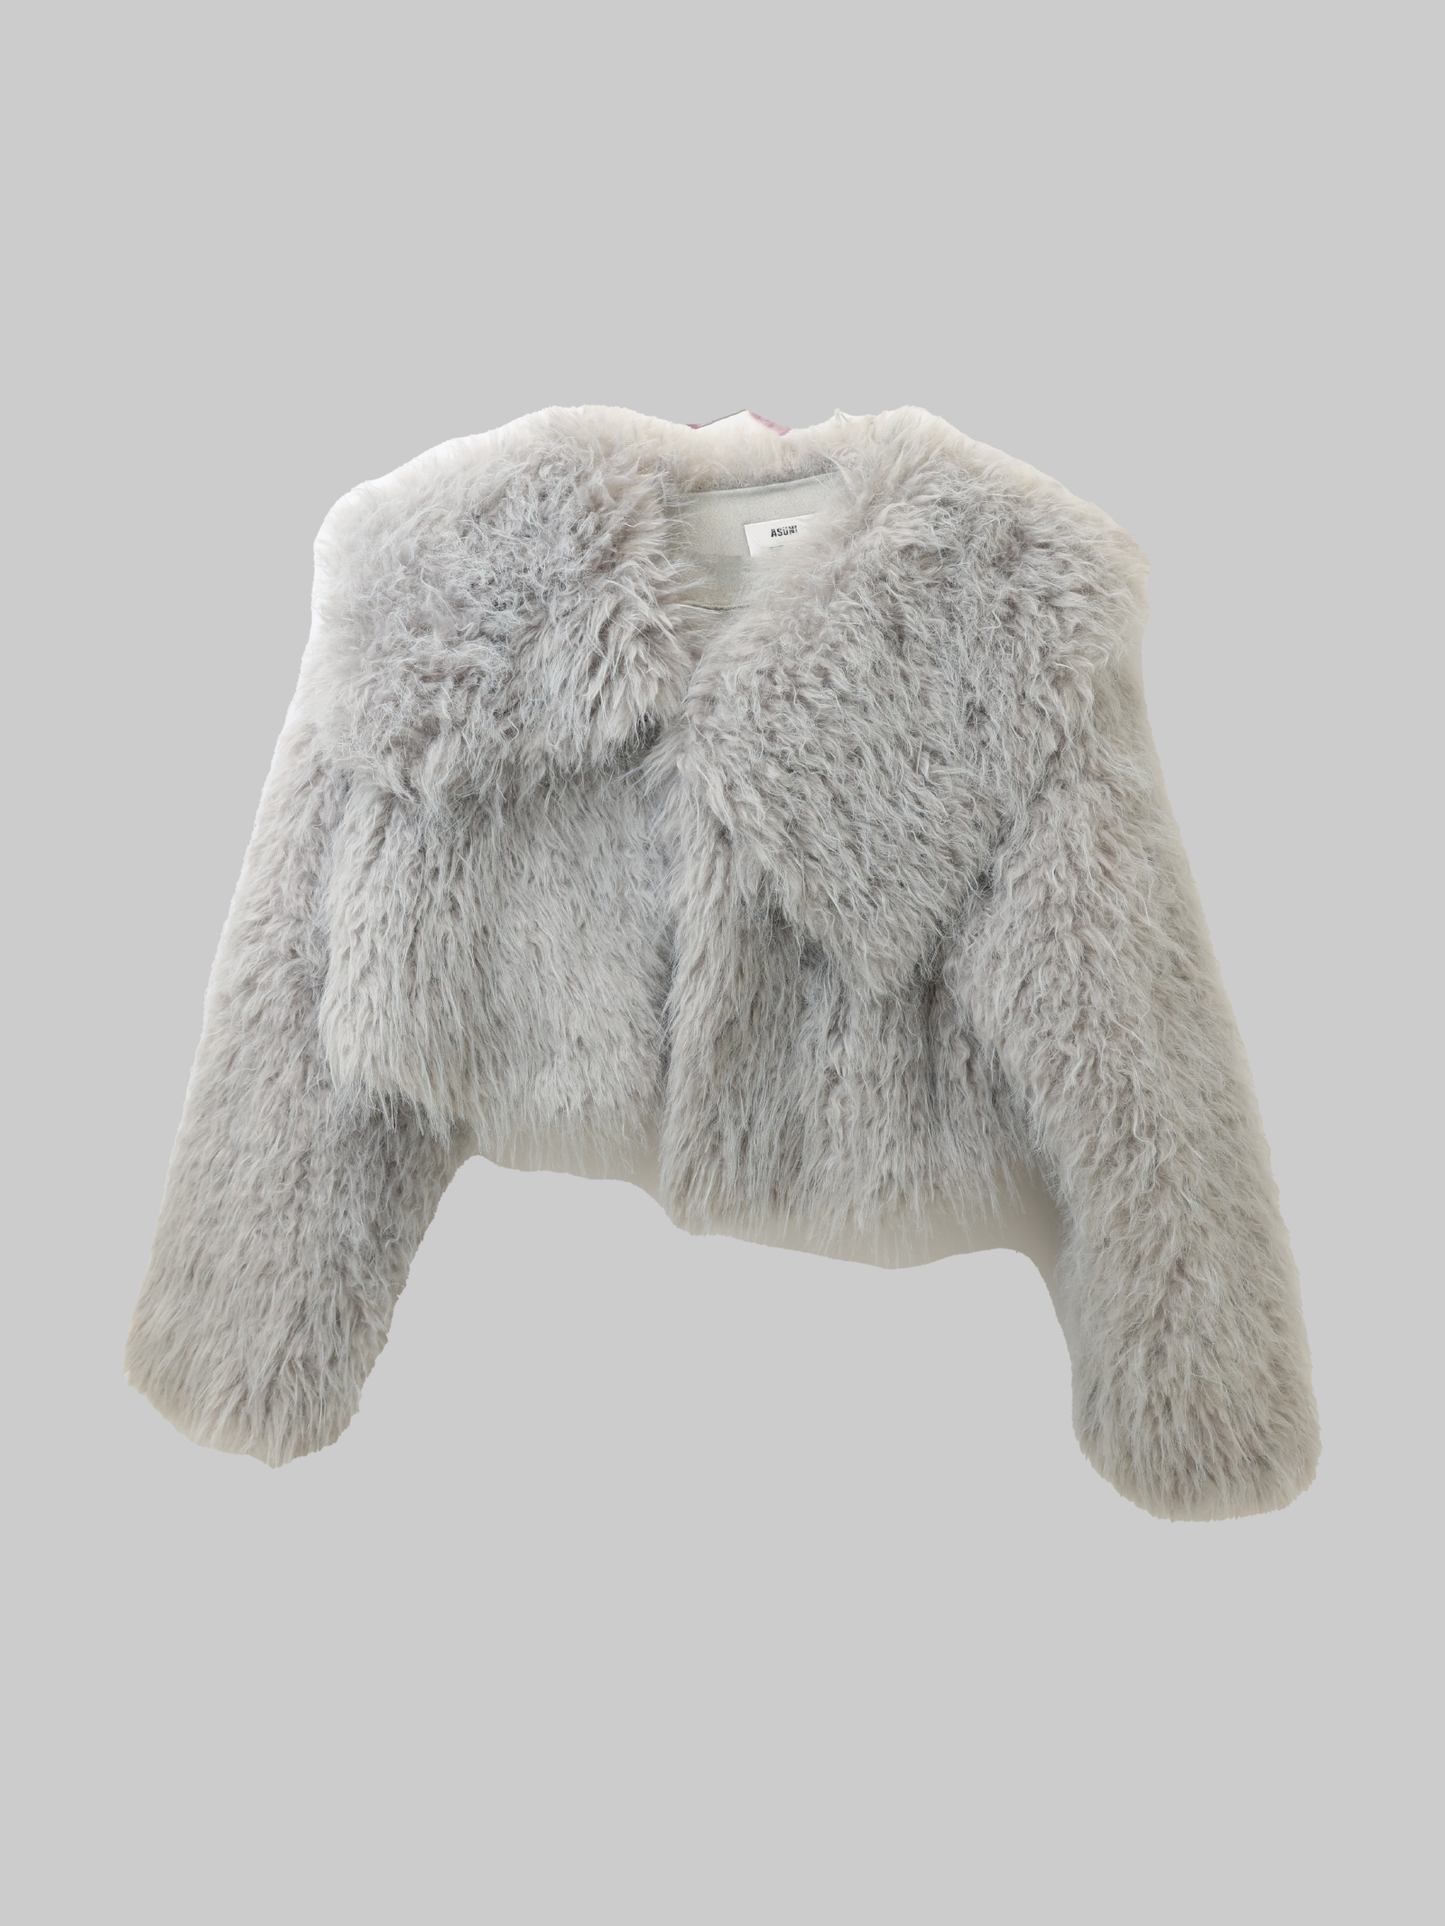 asuni Faux Fur Collar Evening Cape for party Coat in grey